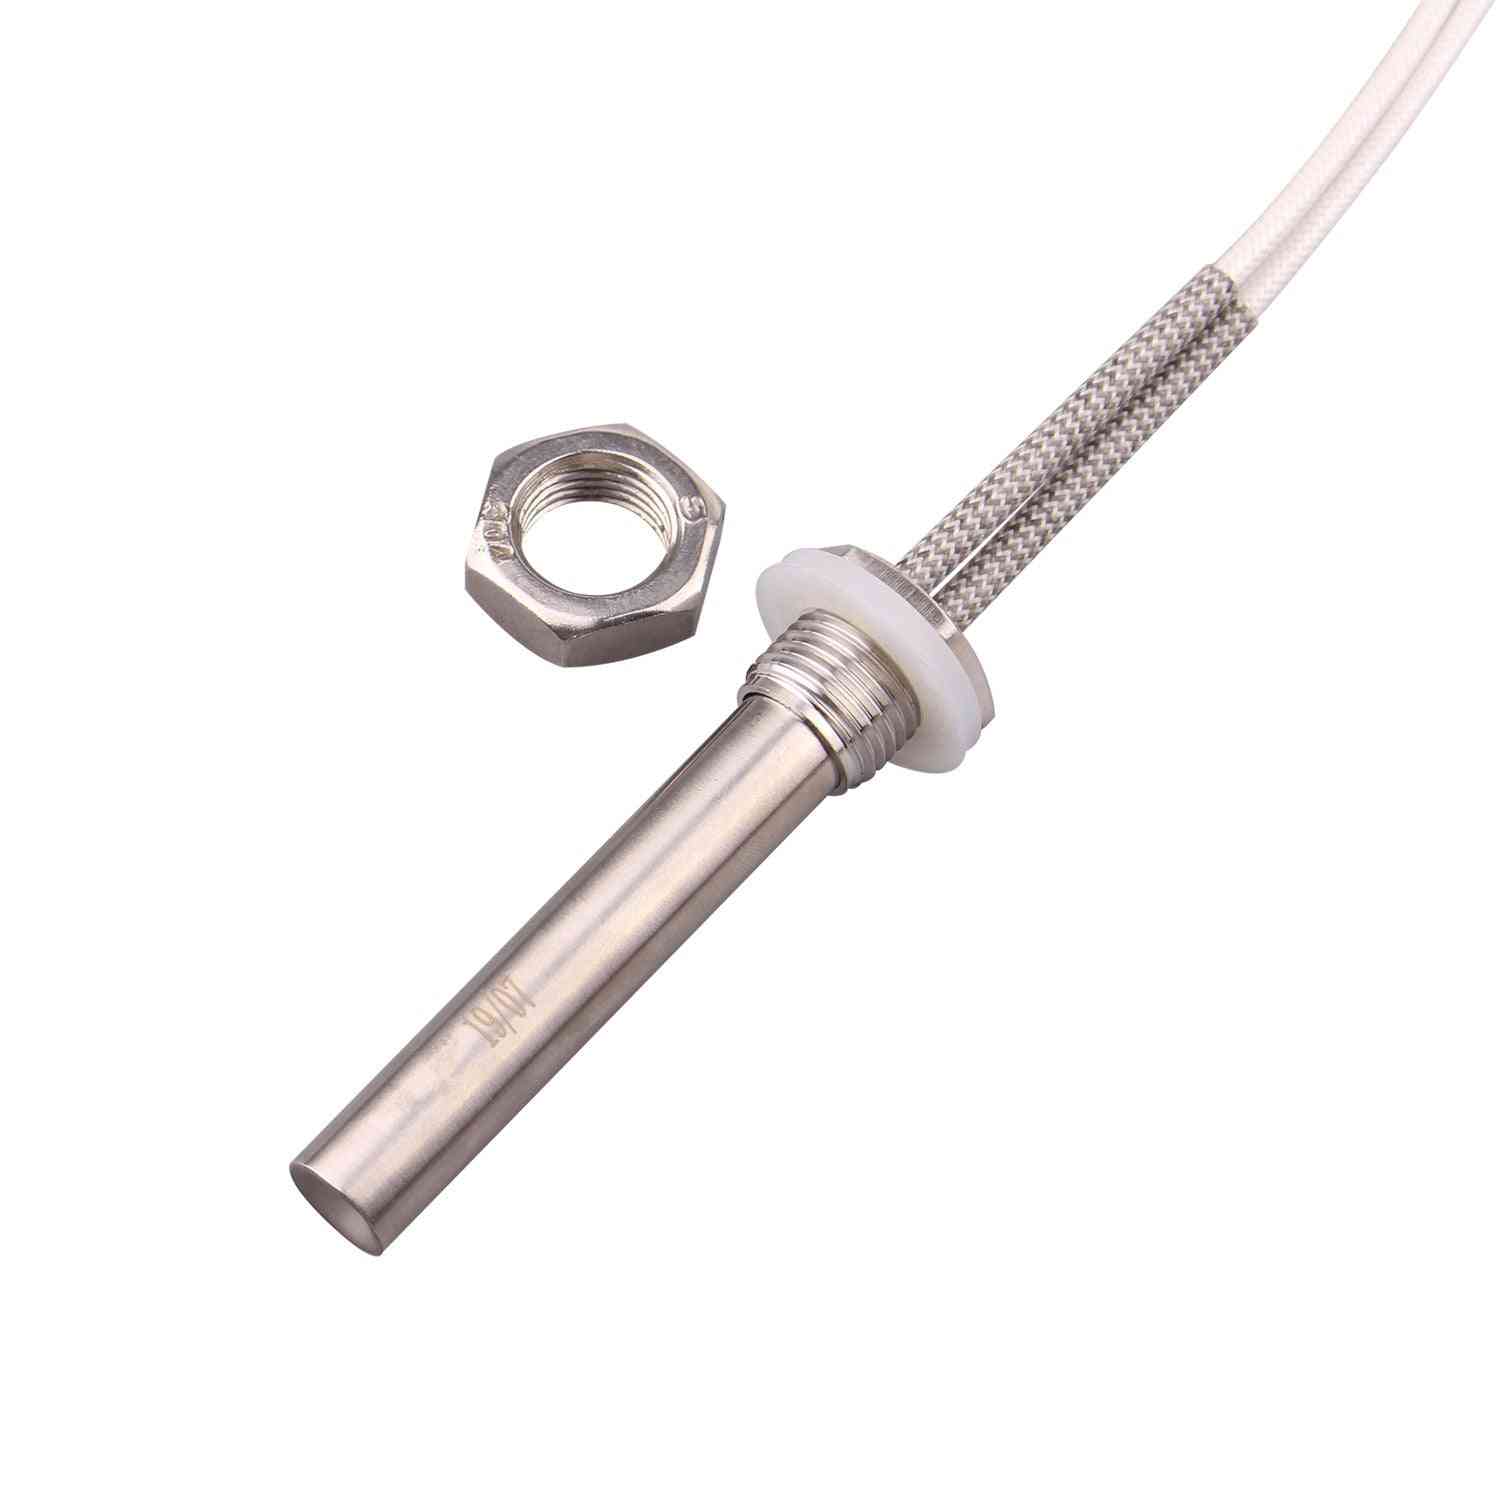 Stainless Steel Electric Tubular Heating Element Immersion Cartridge Heater